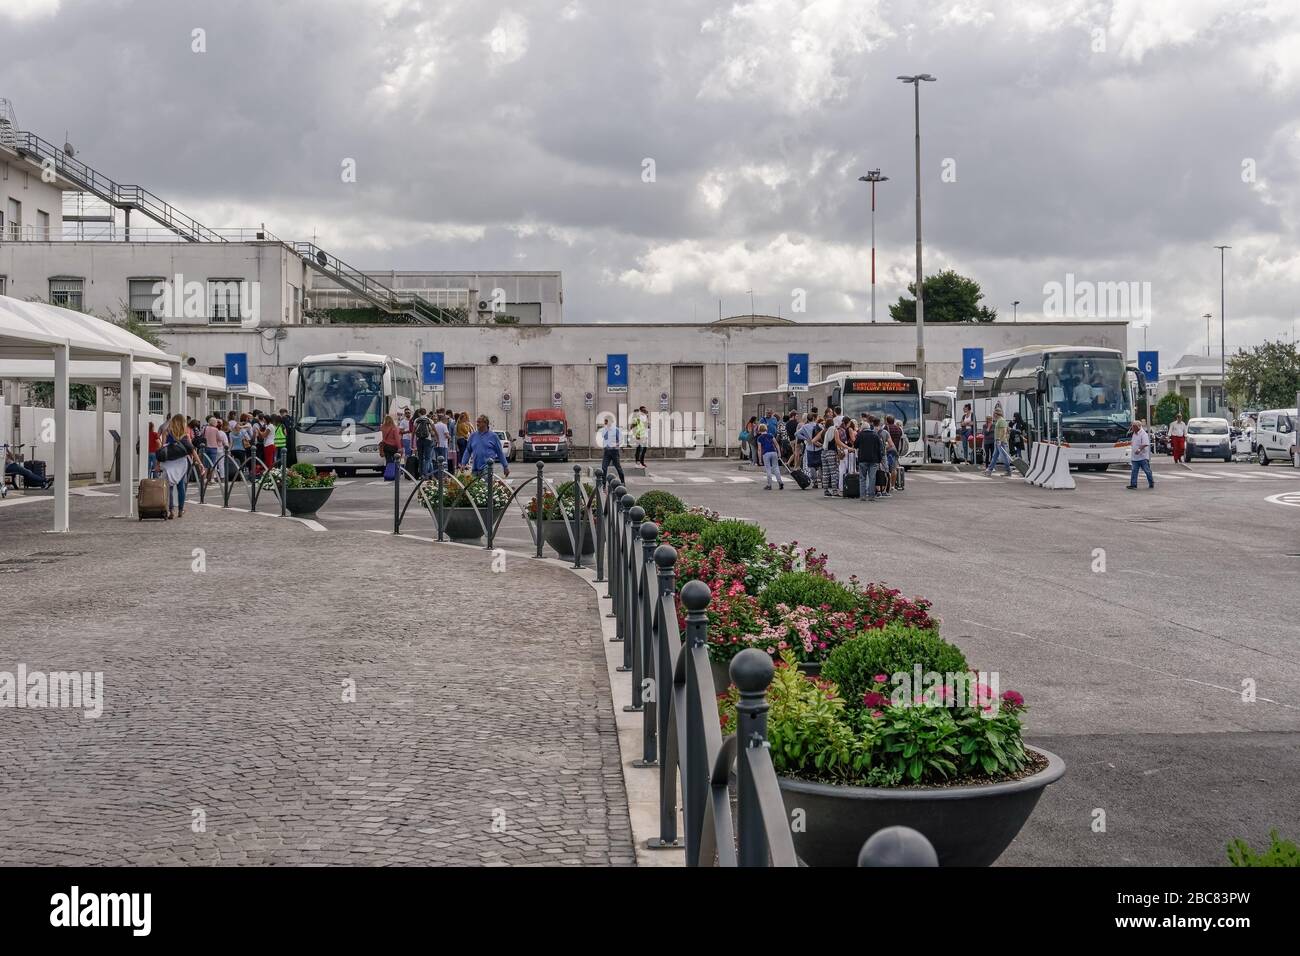 Rome, Italy Ciampino airport terminal bus stop with crowd. Aeroporto G. B. Pastine with tourists with luggage boarding coaches to the Italian capital. Stock Photo